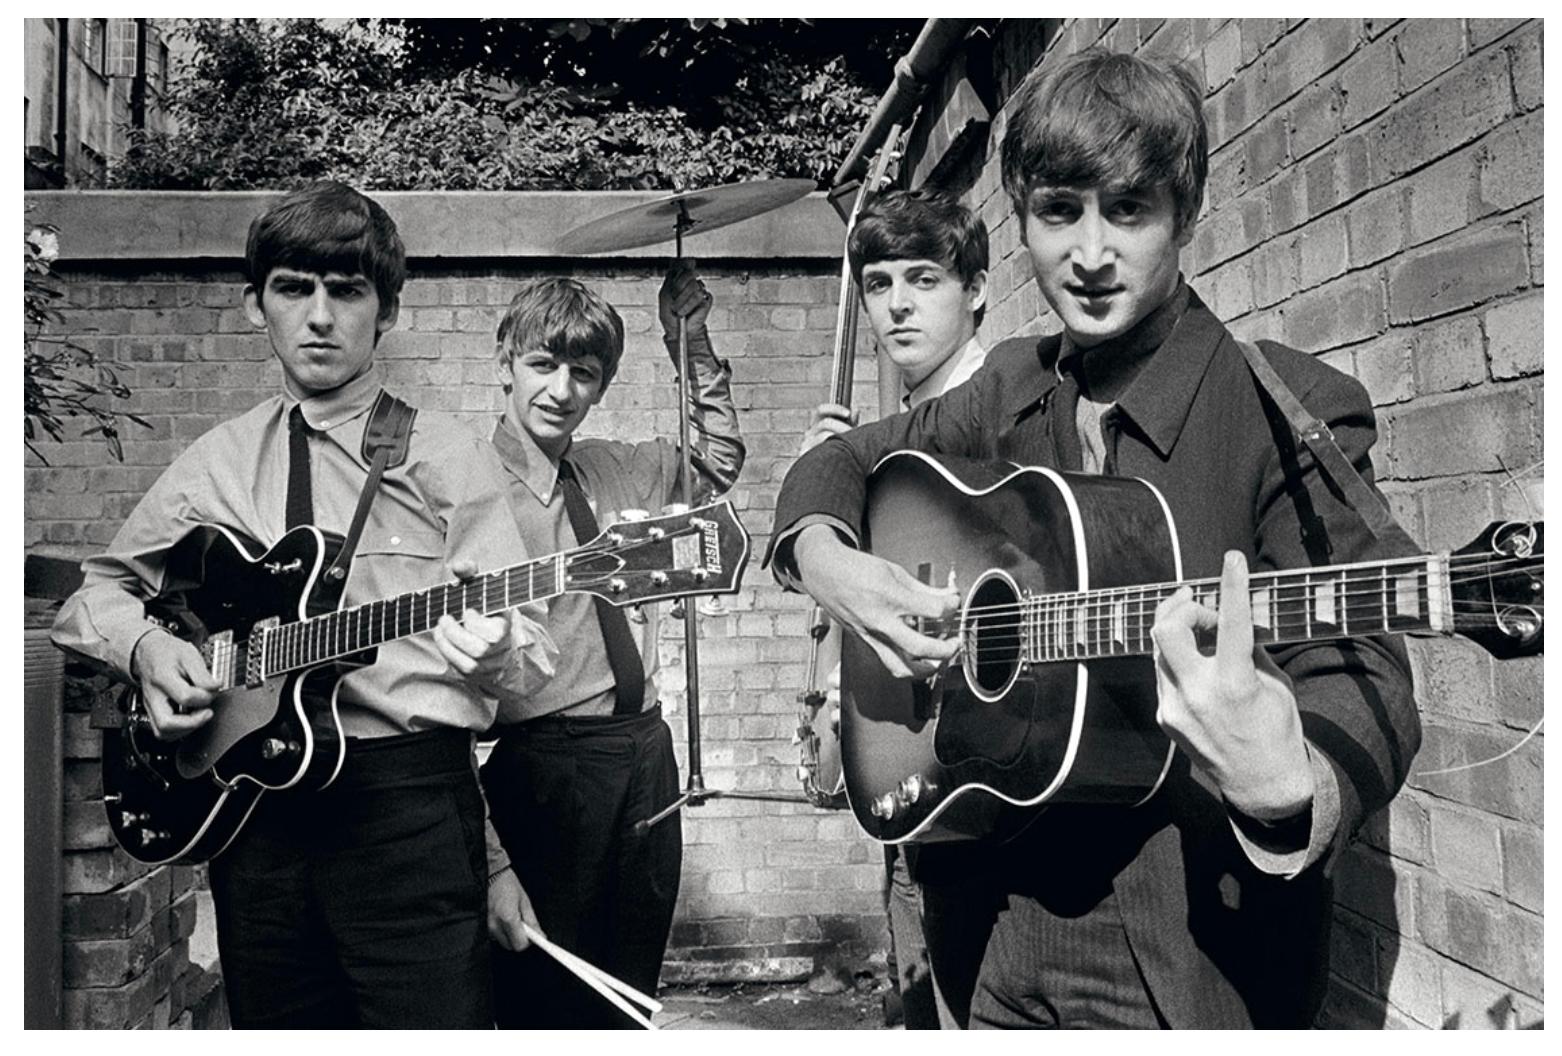 The Beatles 1963 Abbey Road Studios London England.

The first major group portrait of the Beatles was taken by Terry O’Neill during the recording of their first hit single and album ‘Please Please Me’ in the backyard of the Abbey Road Studios in